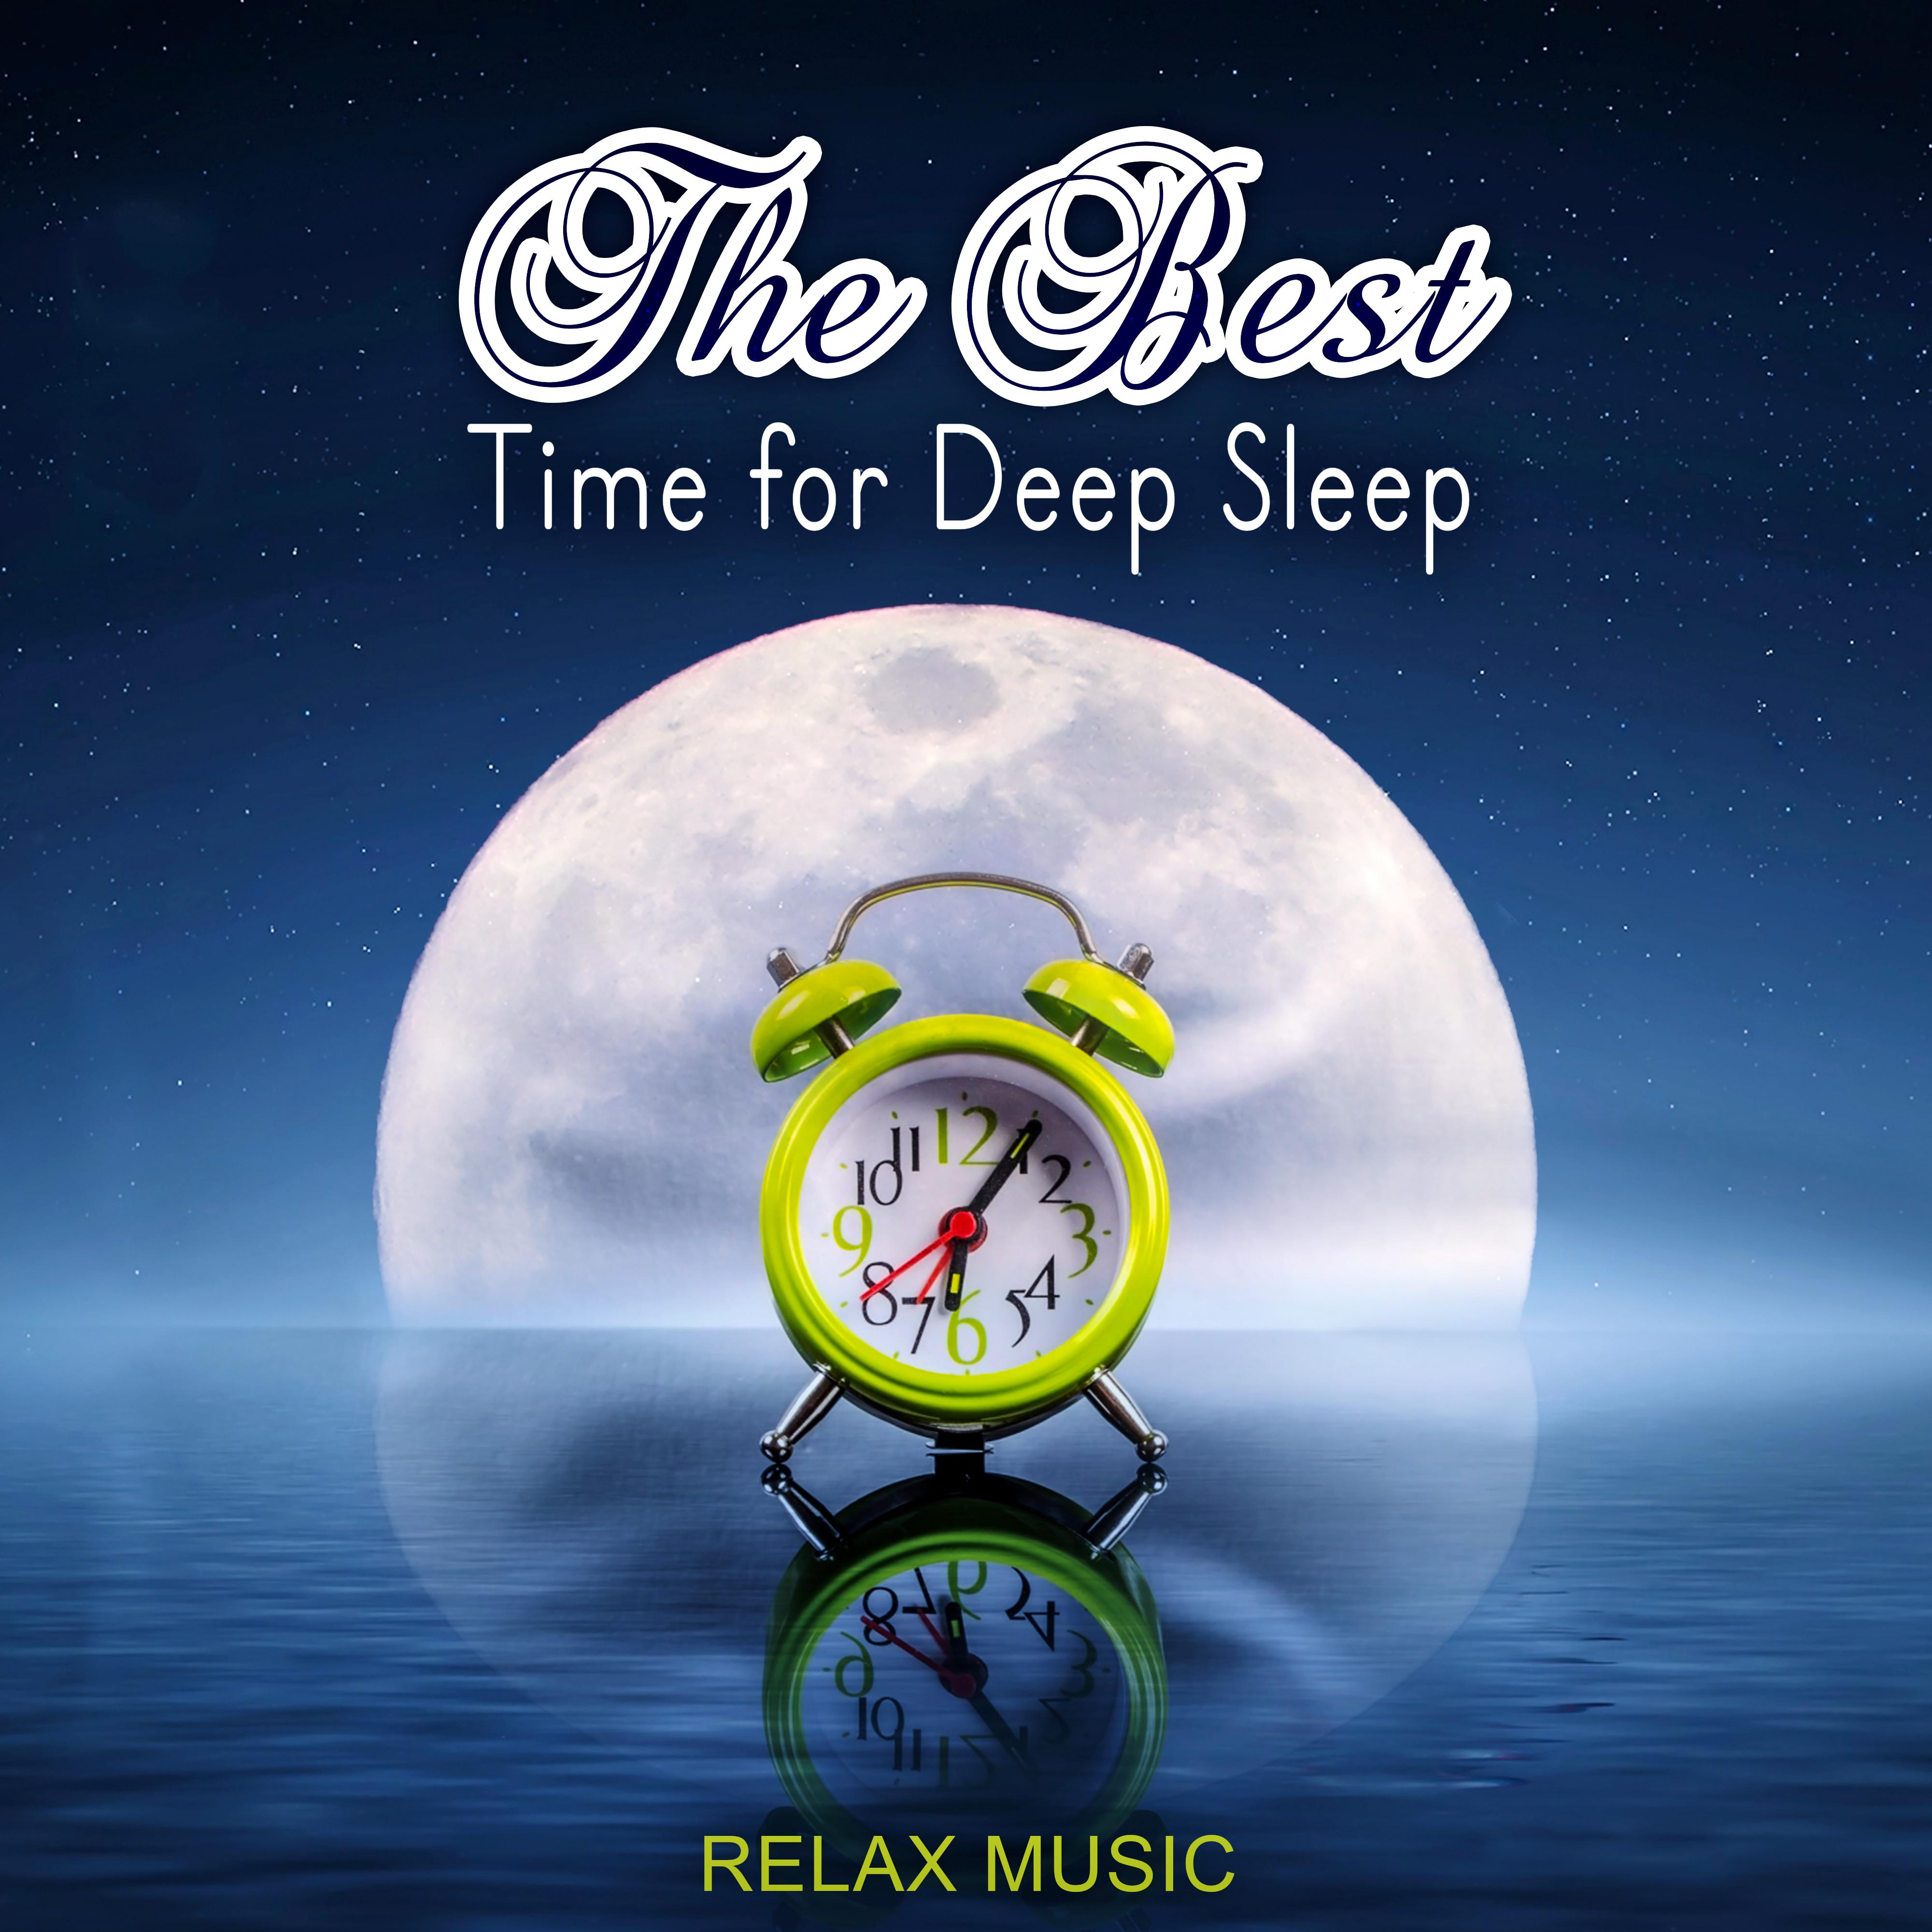 The Best Time for Deep Sleep – Relaxing Therapy Sounds and Sleeping Music to Help You Relax All Night Long, Healing Meditation and Lullaby Songs for Better Sleep